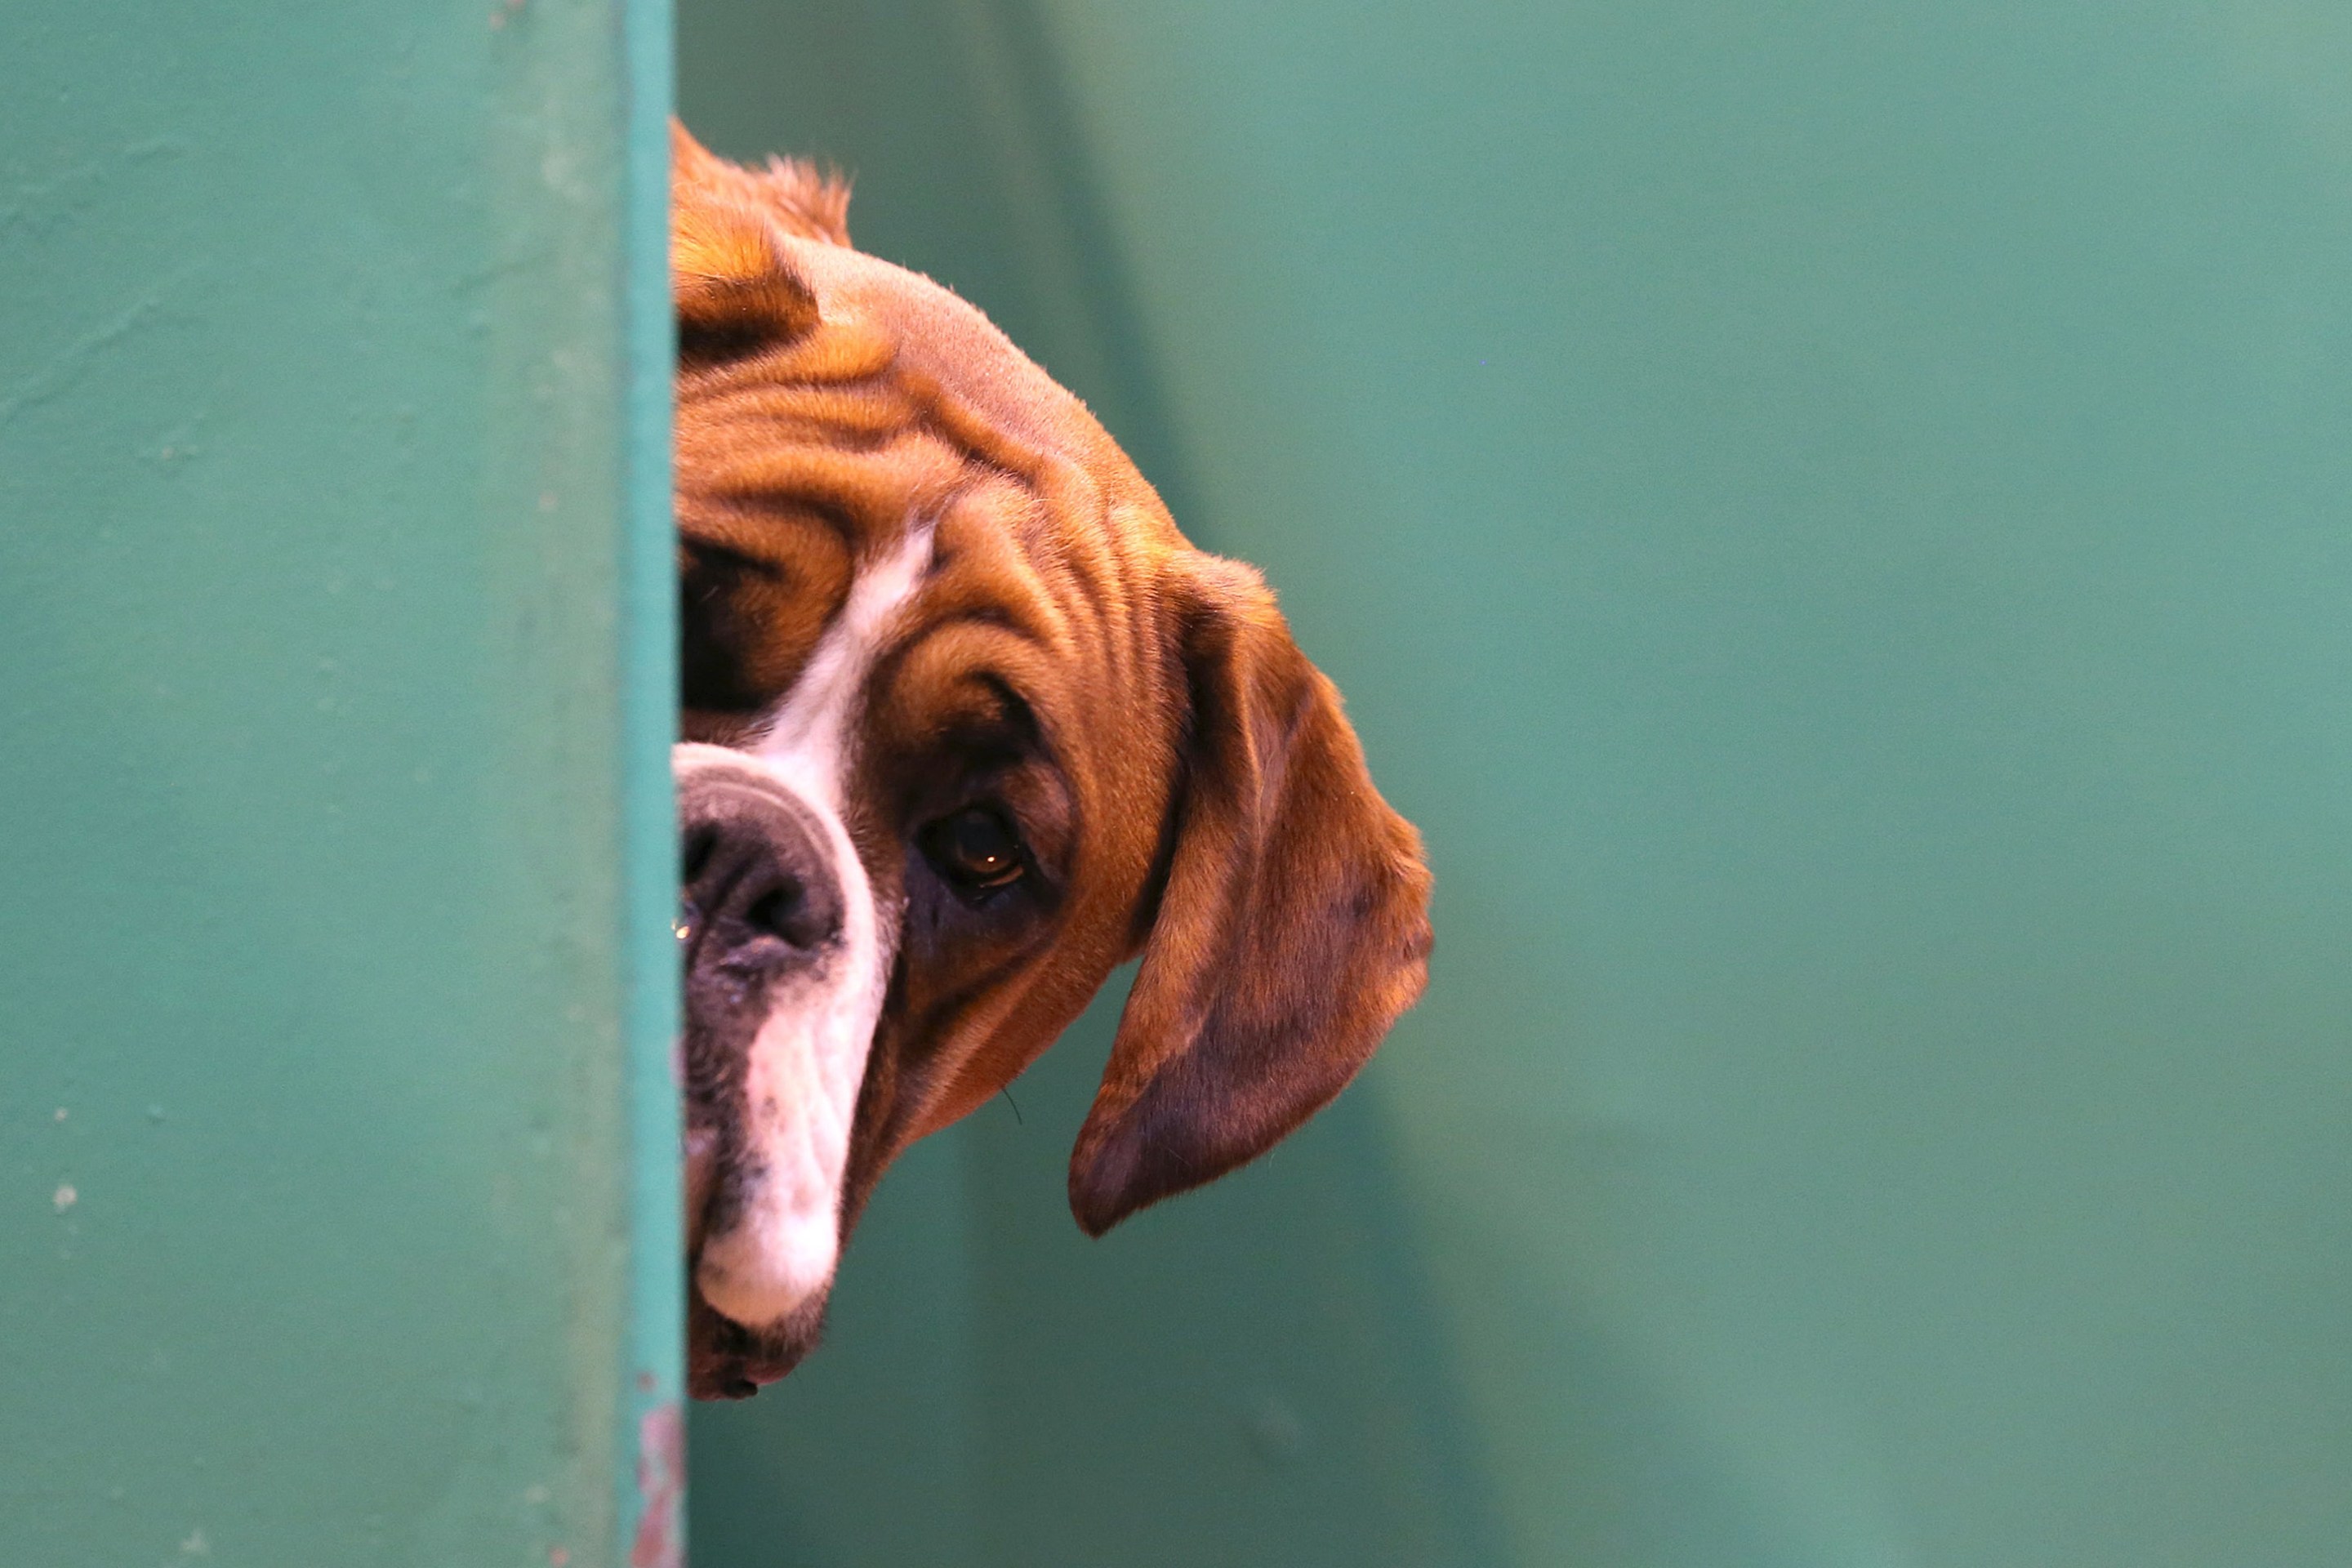 BIRMINGHAM, ENGLAND - MARCH 06: A Boxer dog looks out from its kennel on first day of Crufts dog show at the NEC on March 6, 2014 in Birmingham, England. Said to be the largest show of its kind in the world, the annual four-day event, features thousands of dogs, with competitors travelling from countries across the globe to take part. Crufts, which was first held in 1891 and sees thousands of dogs vie for the coveted title of 'Best in Show'. (Photo by Matt Cardy/Getty Images)